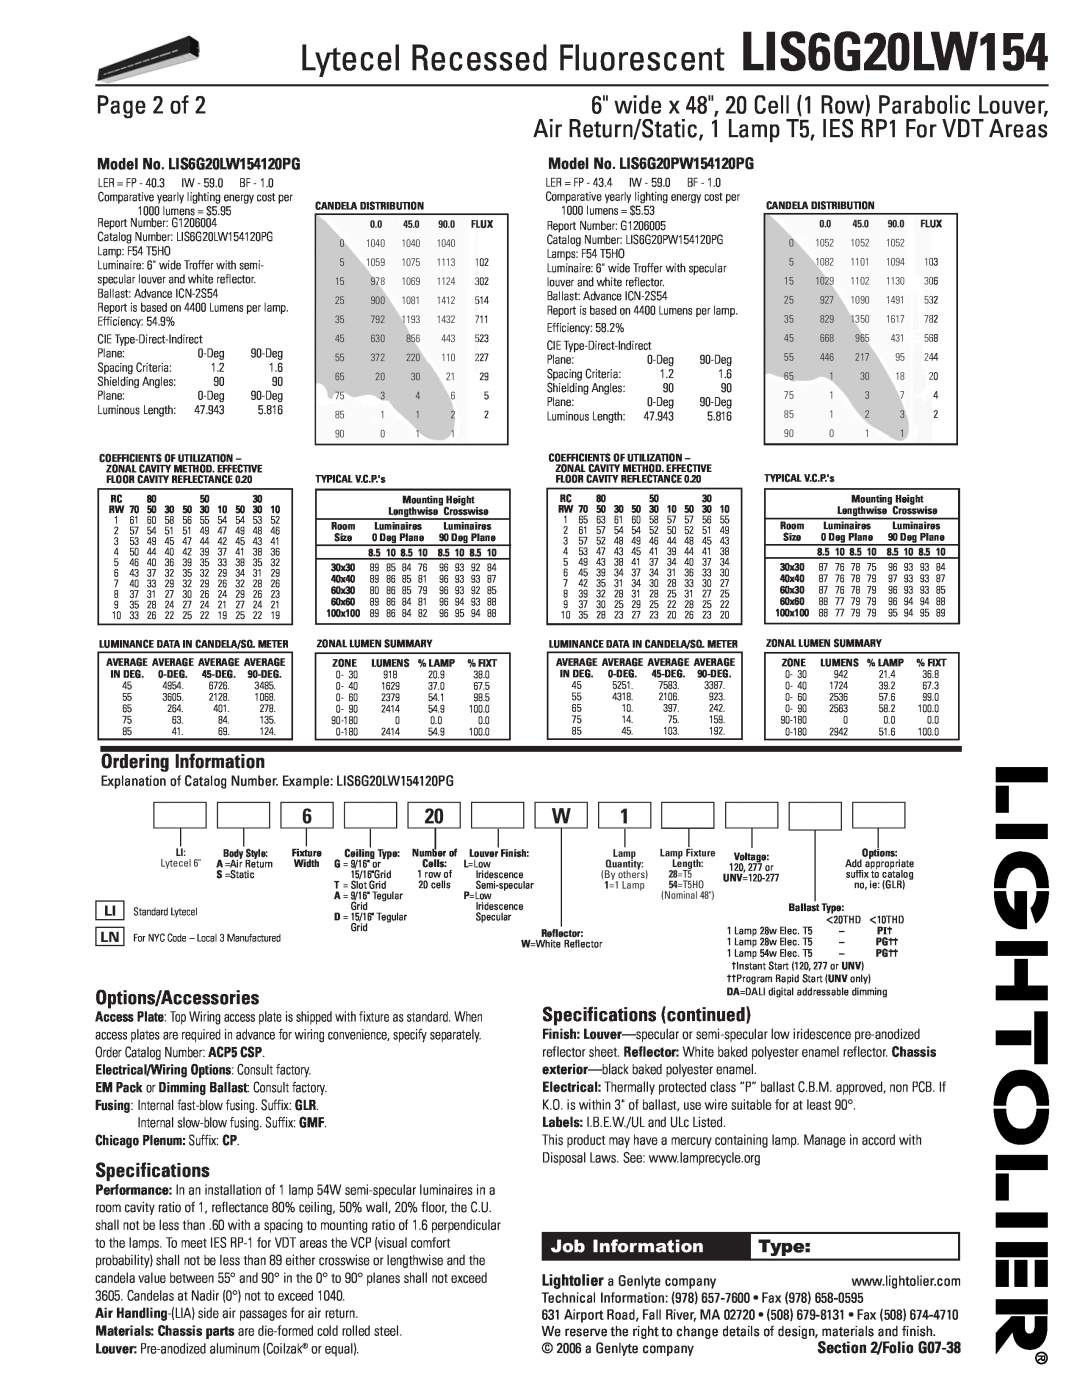 Lightolier LIS6G20LW154 Page 2 of, Ordering Information, Options/Accessories, Specifications continued, Job Information 